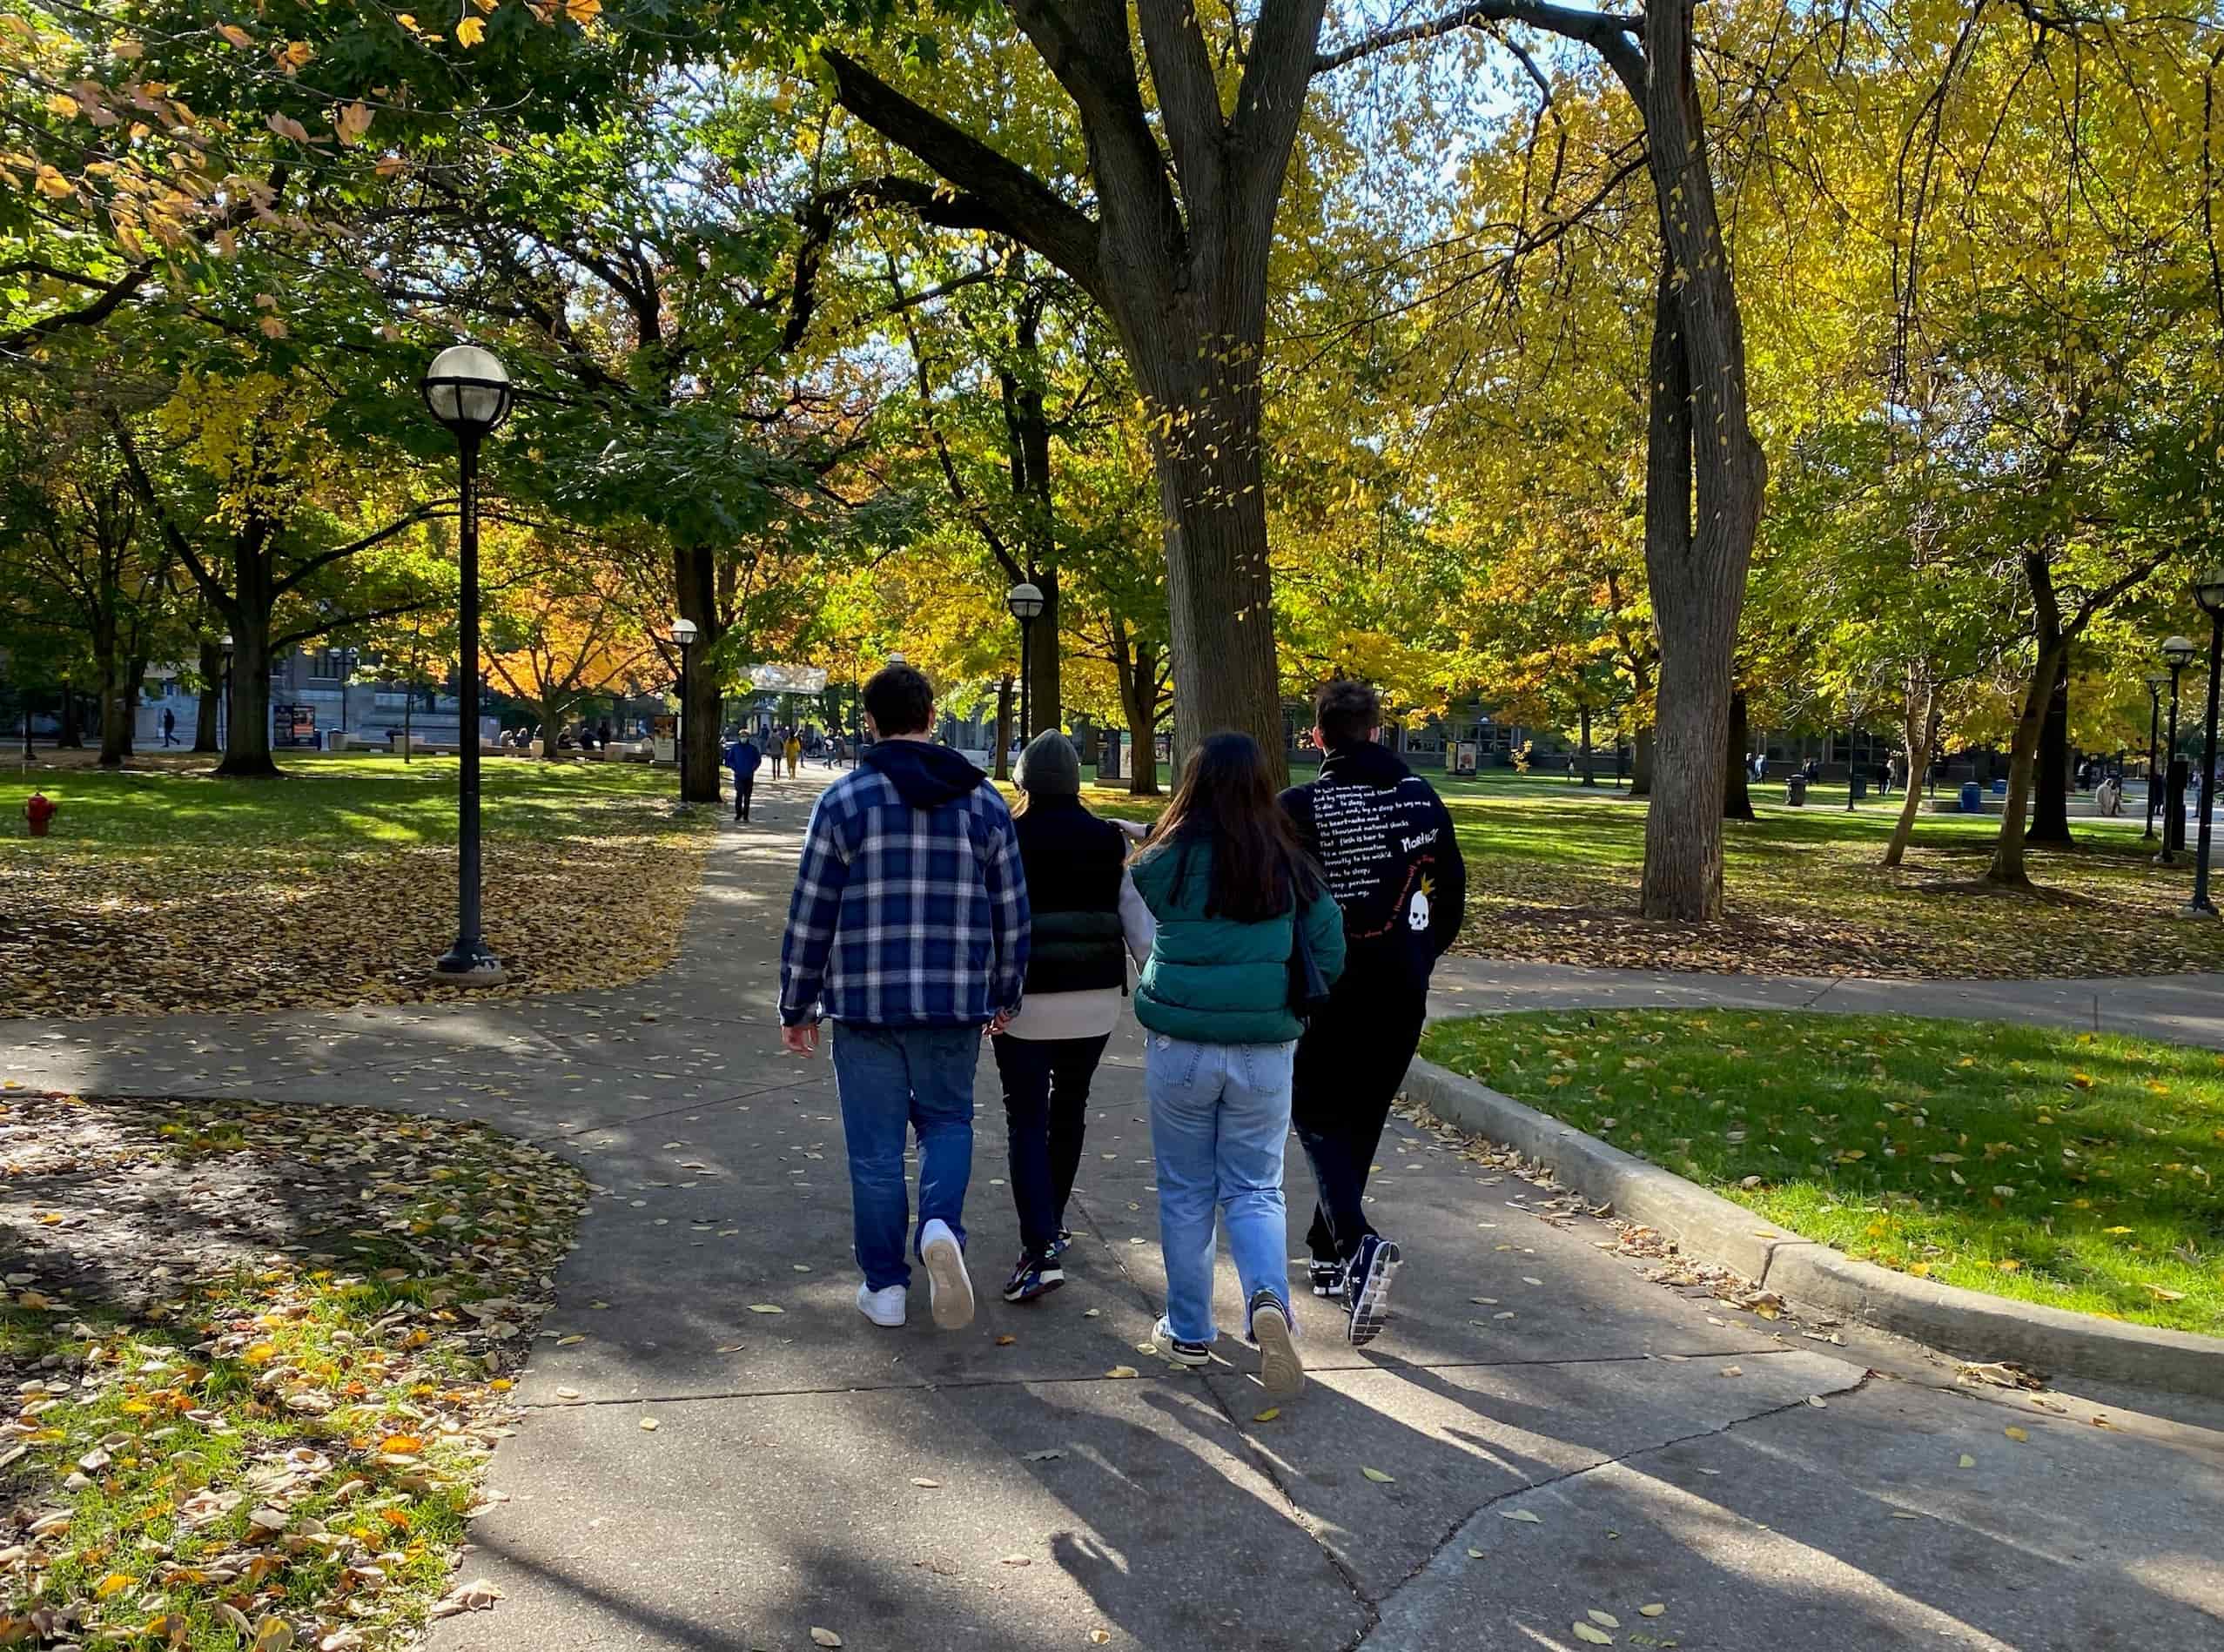 Four adults in fall clothing walk into the diag away from the camera.